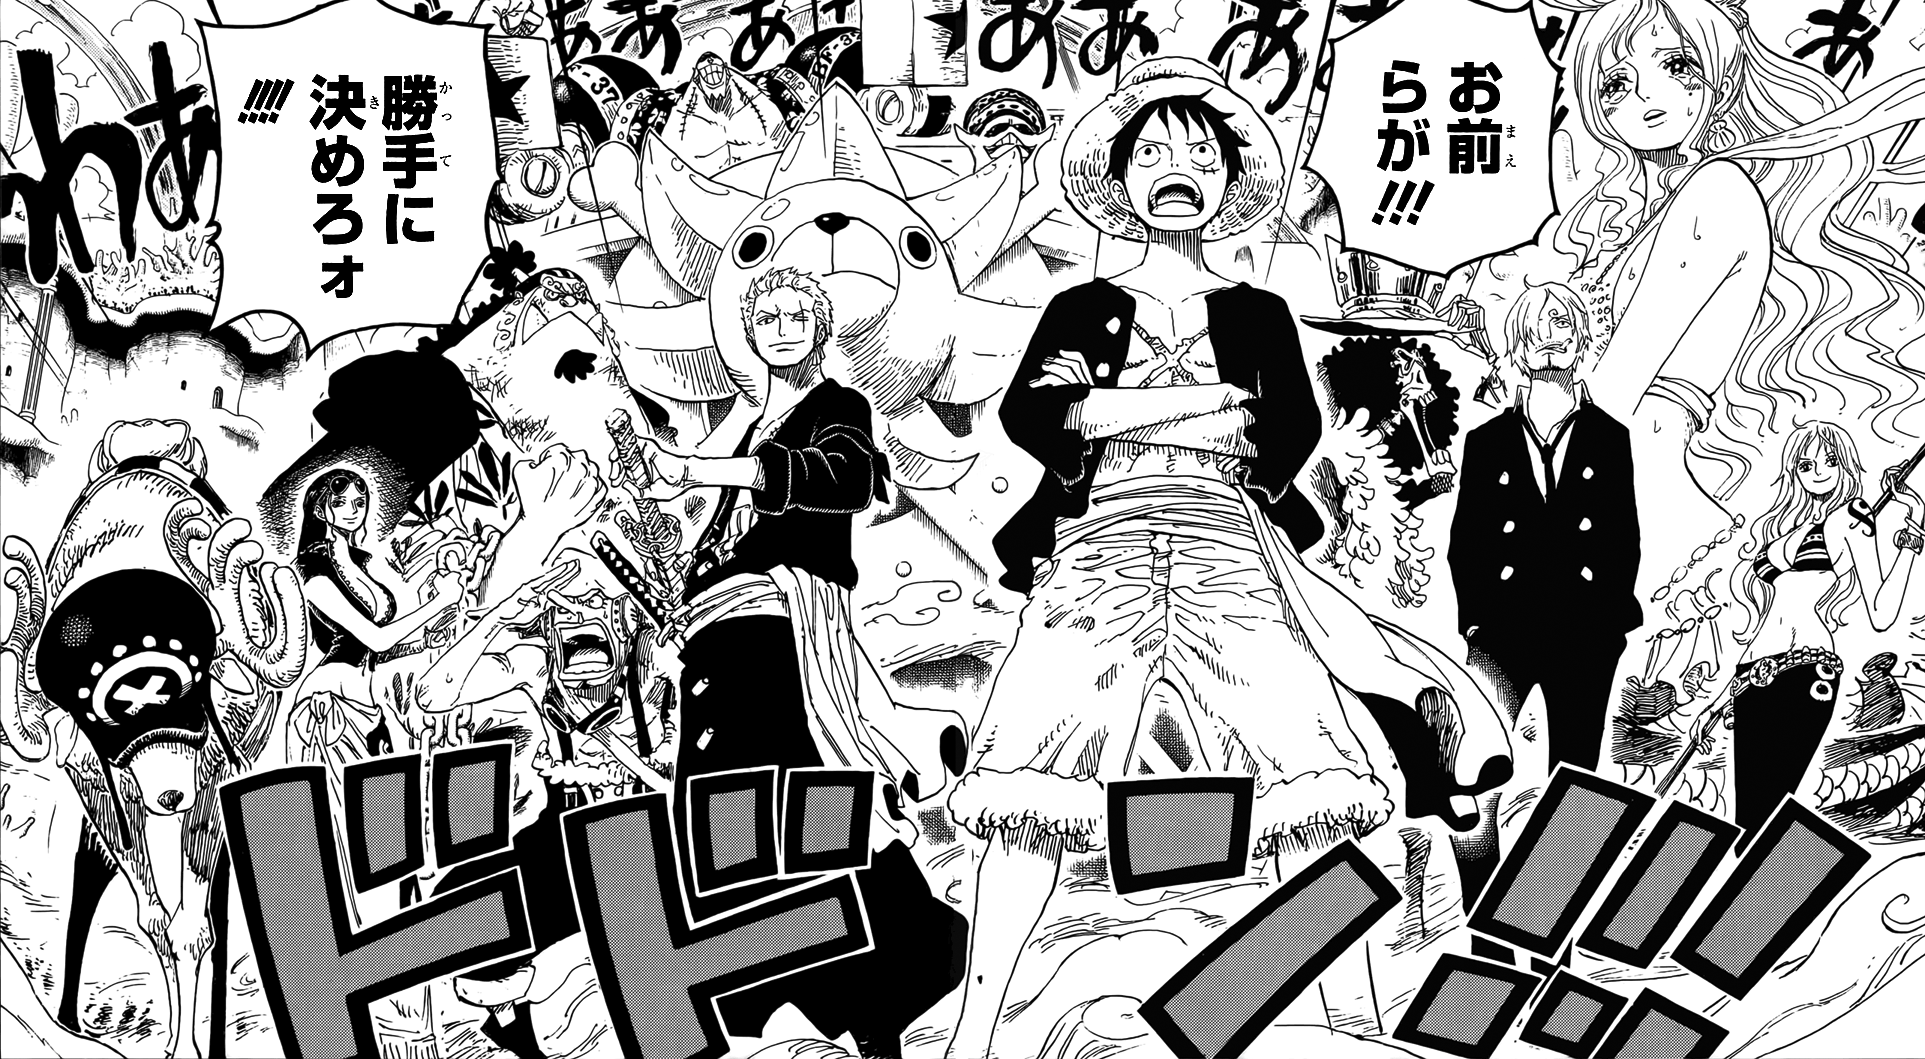 One Piece Chapter 549 Discussion and Breakdown + 550 Spoiler Confirmed! +_+